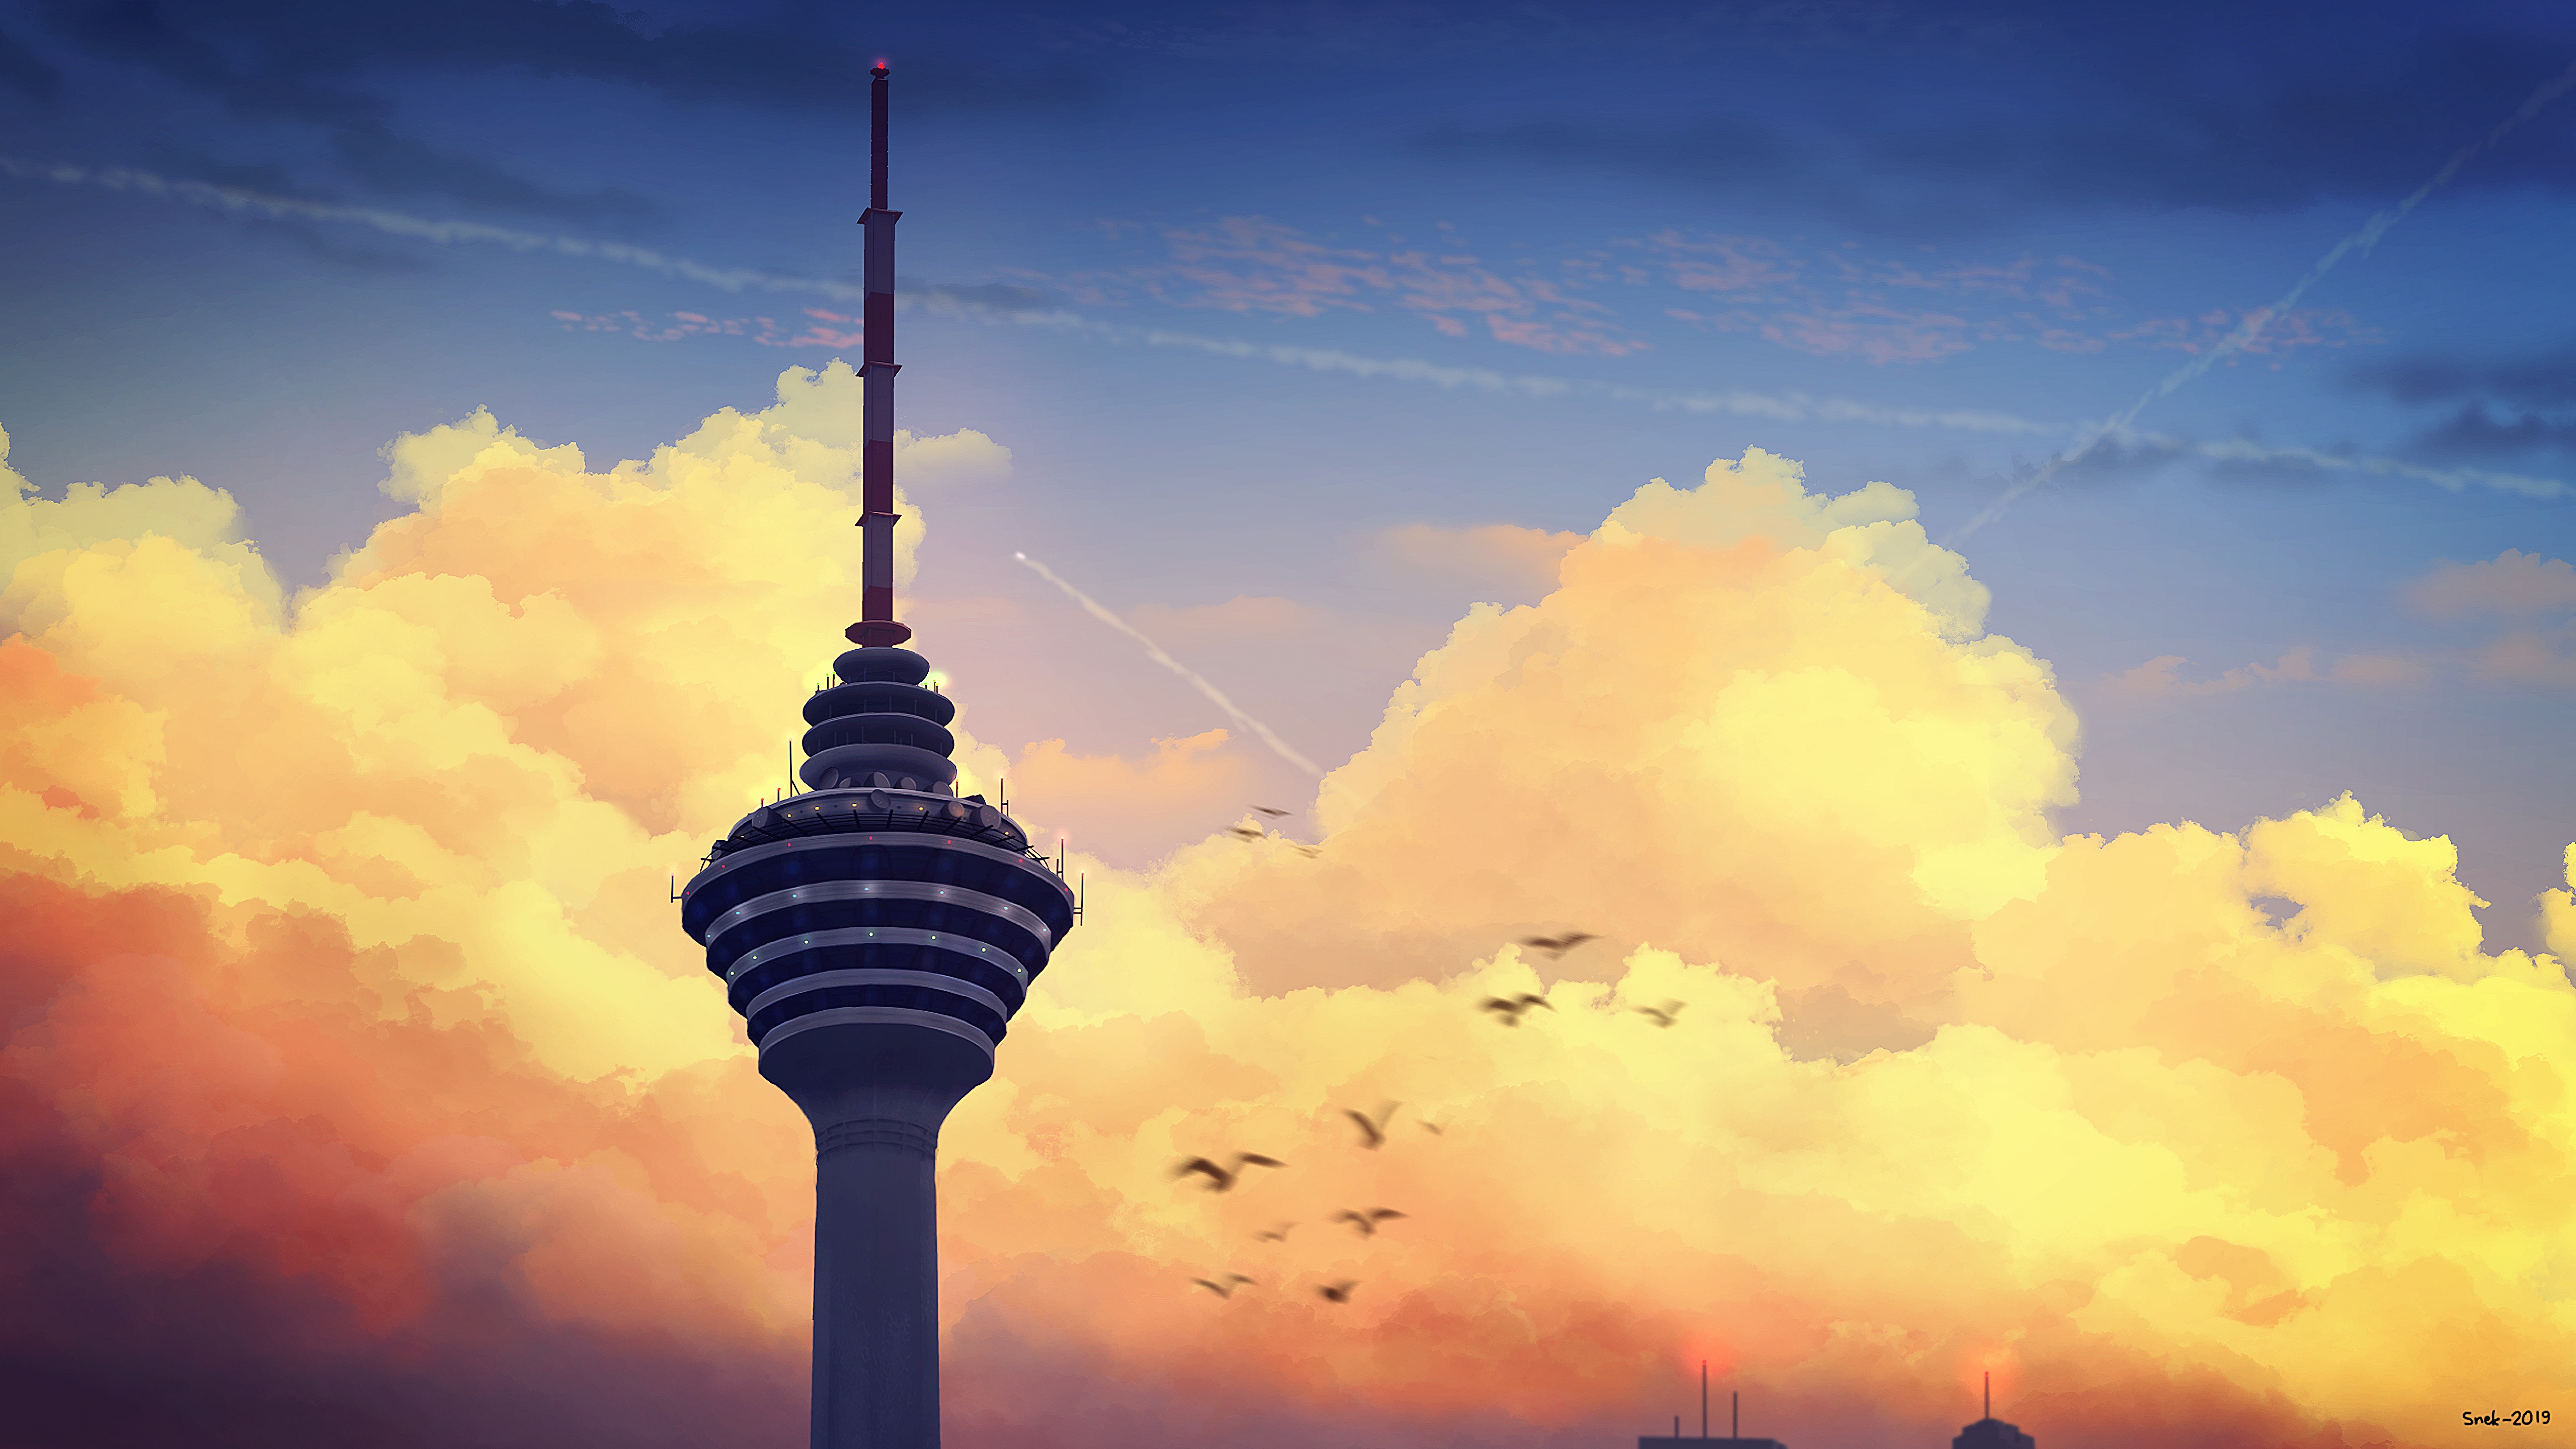 General 5120x2880 tower drawing birds clouds sky